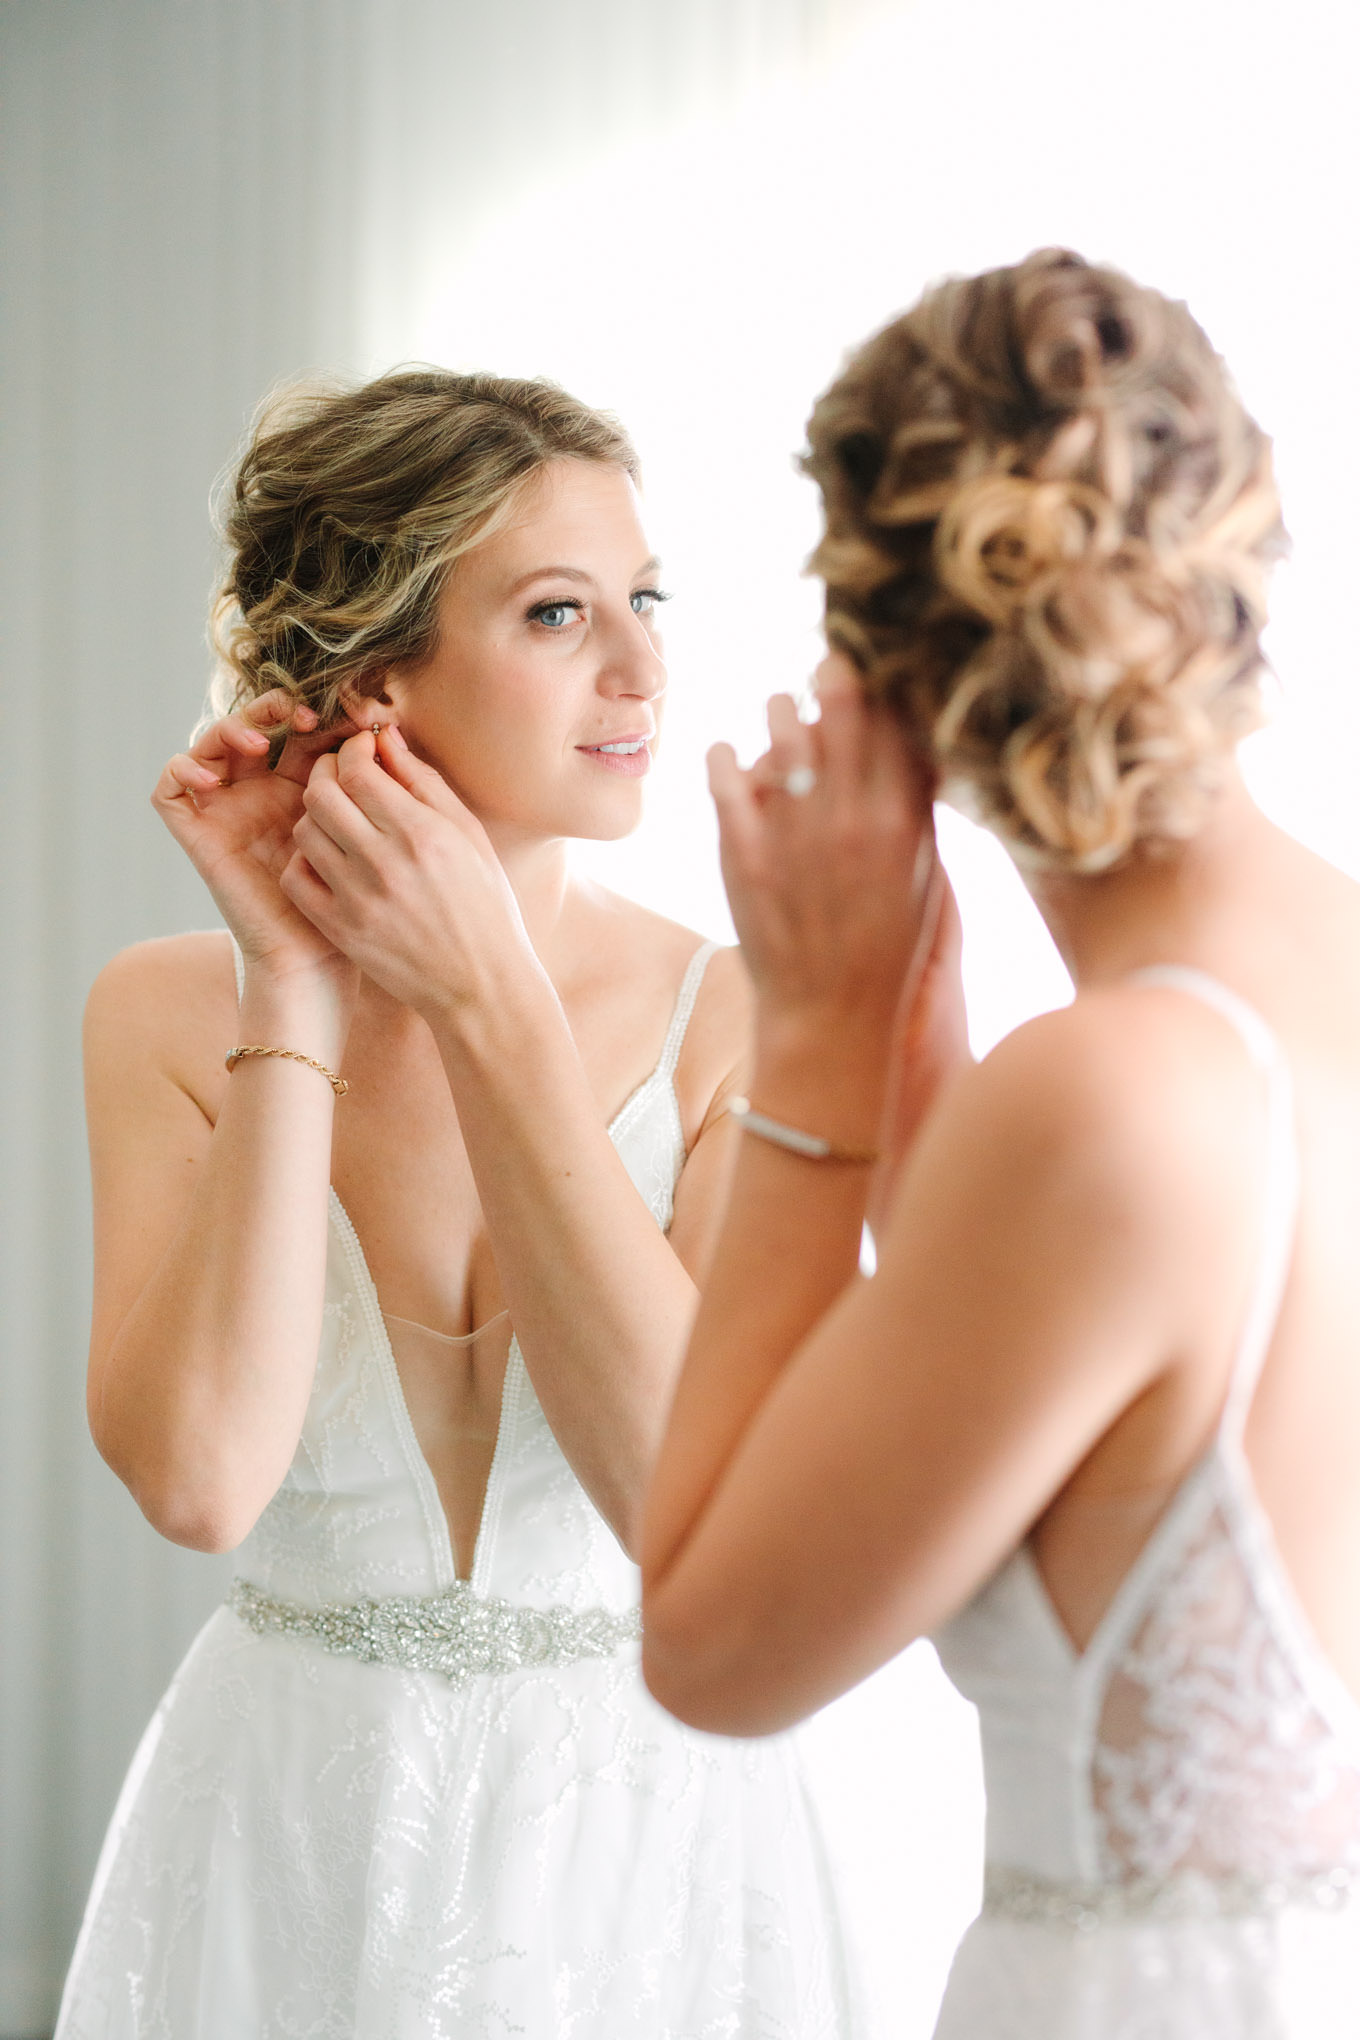 Bride getting ready | Living Desert Zoo & Gardens wedding with unique details | Elevated and colorful wedding photography for fun-loving couples in Southern California |  #PalmSprings #palmspringsphotographer #gardenwedding #palmspringswedding  Source: Mary Costa Photography | Los Angeles wedding photographer 